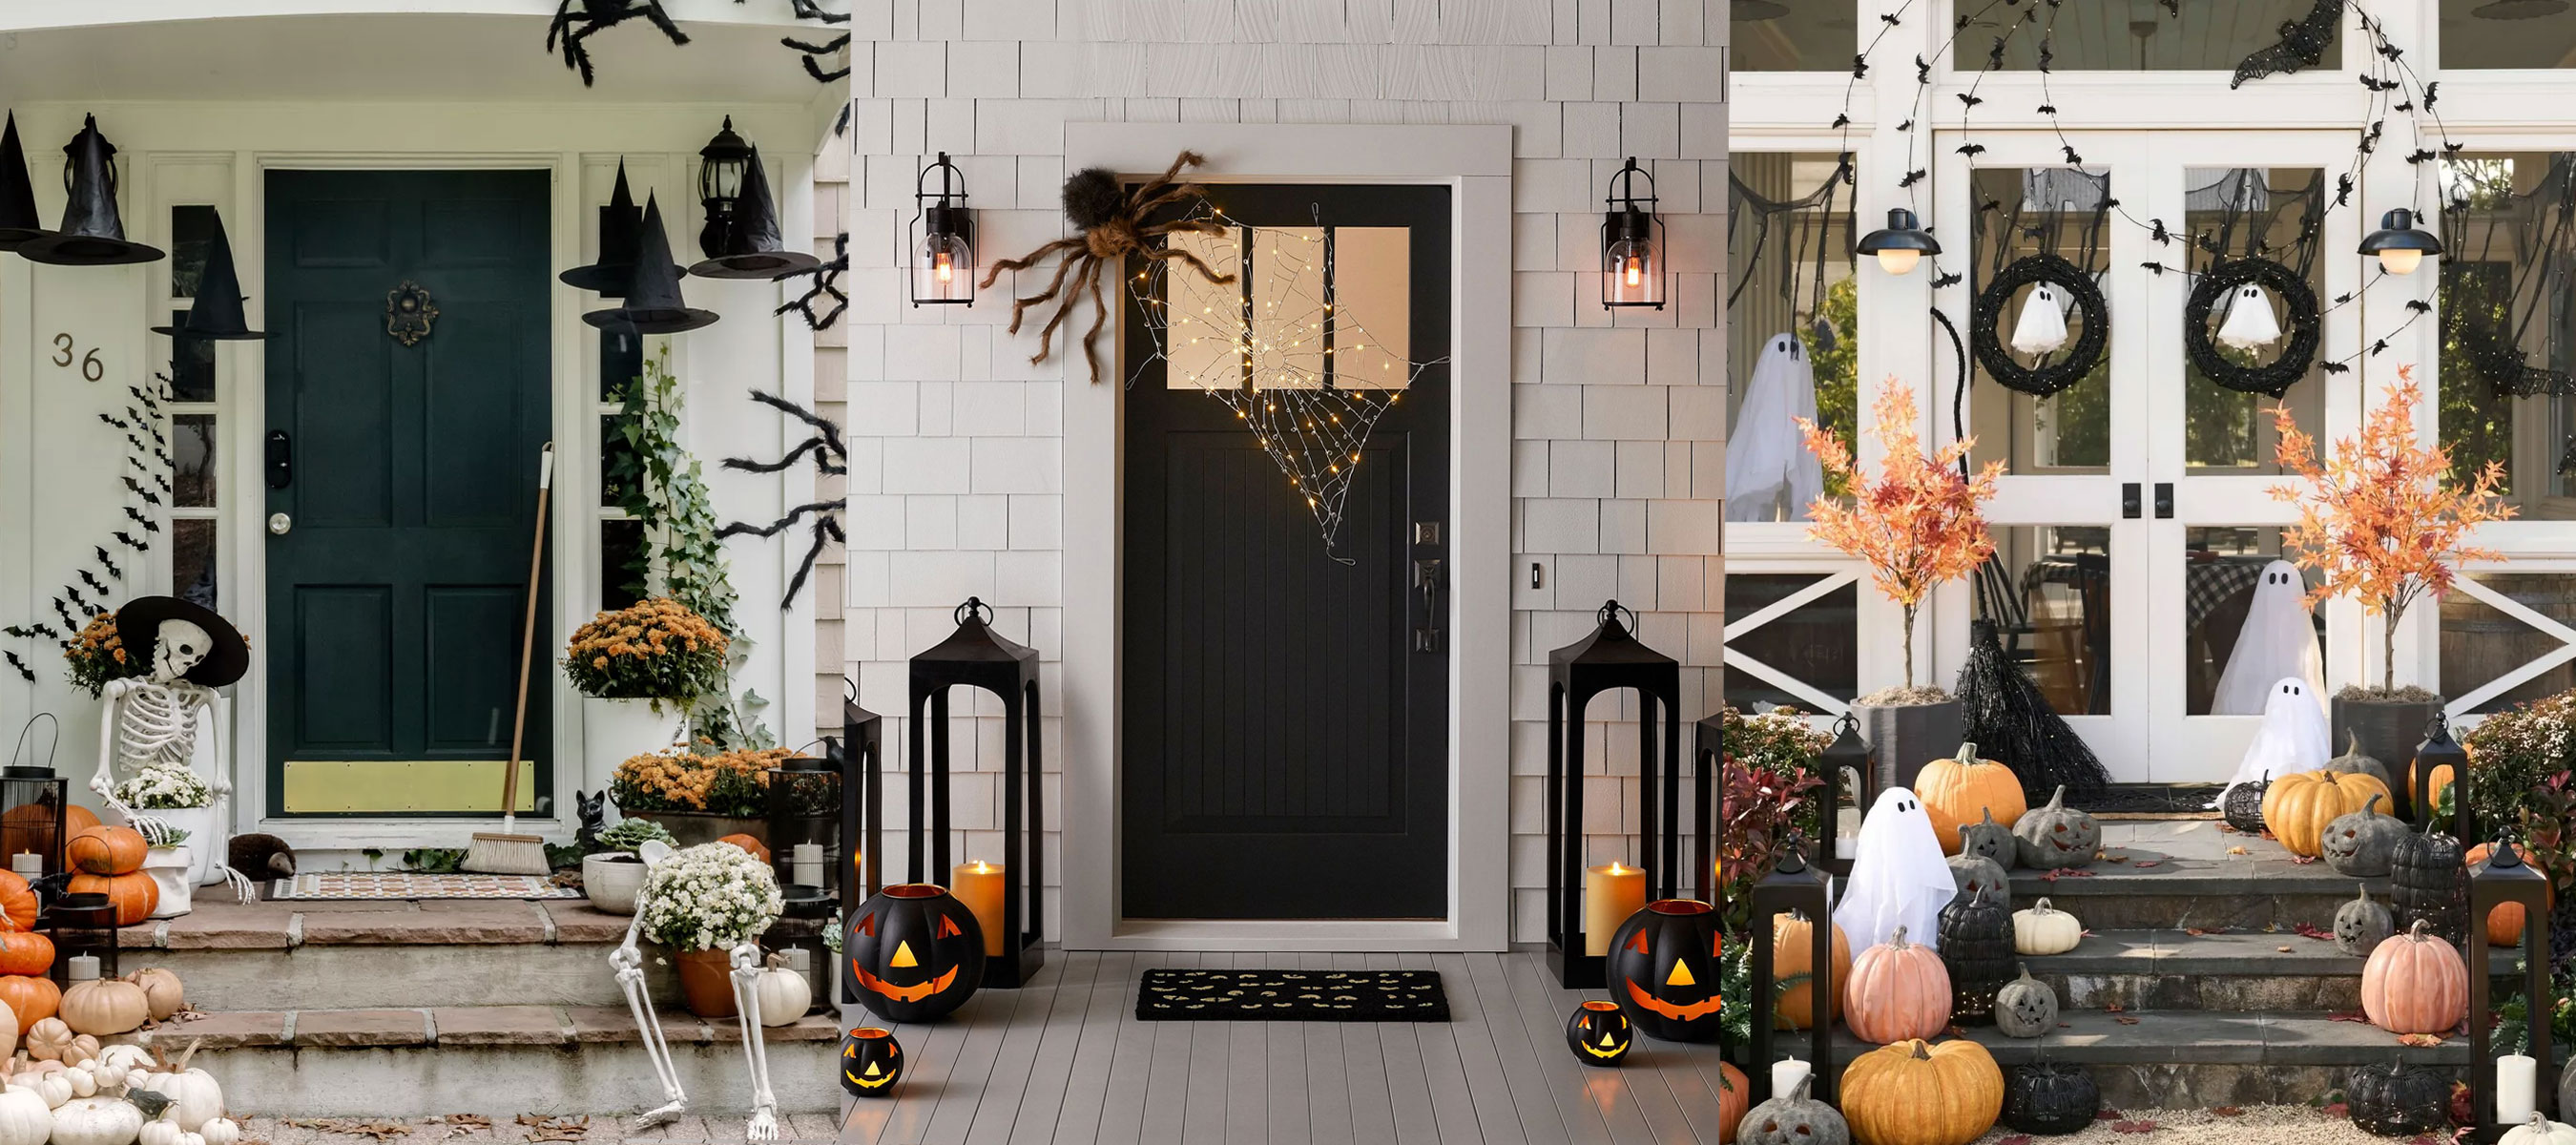 Choosing a theme for Halloween decorations, News